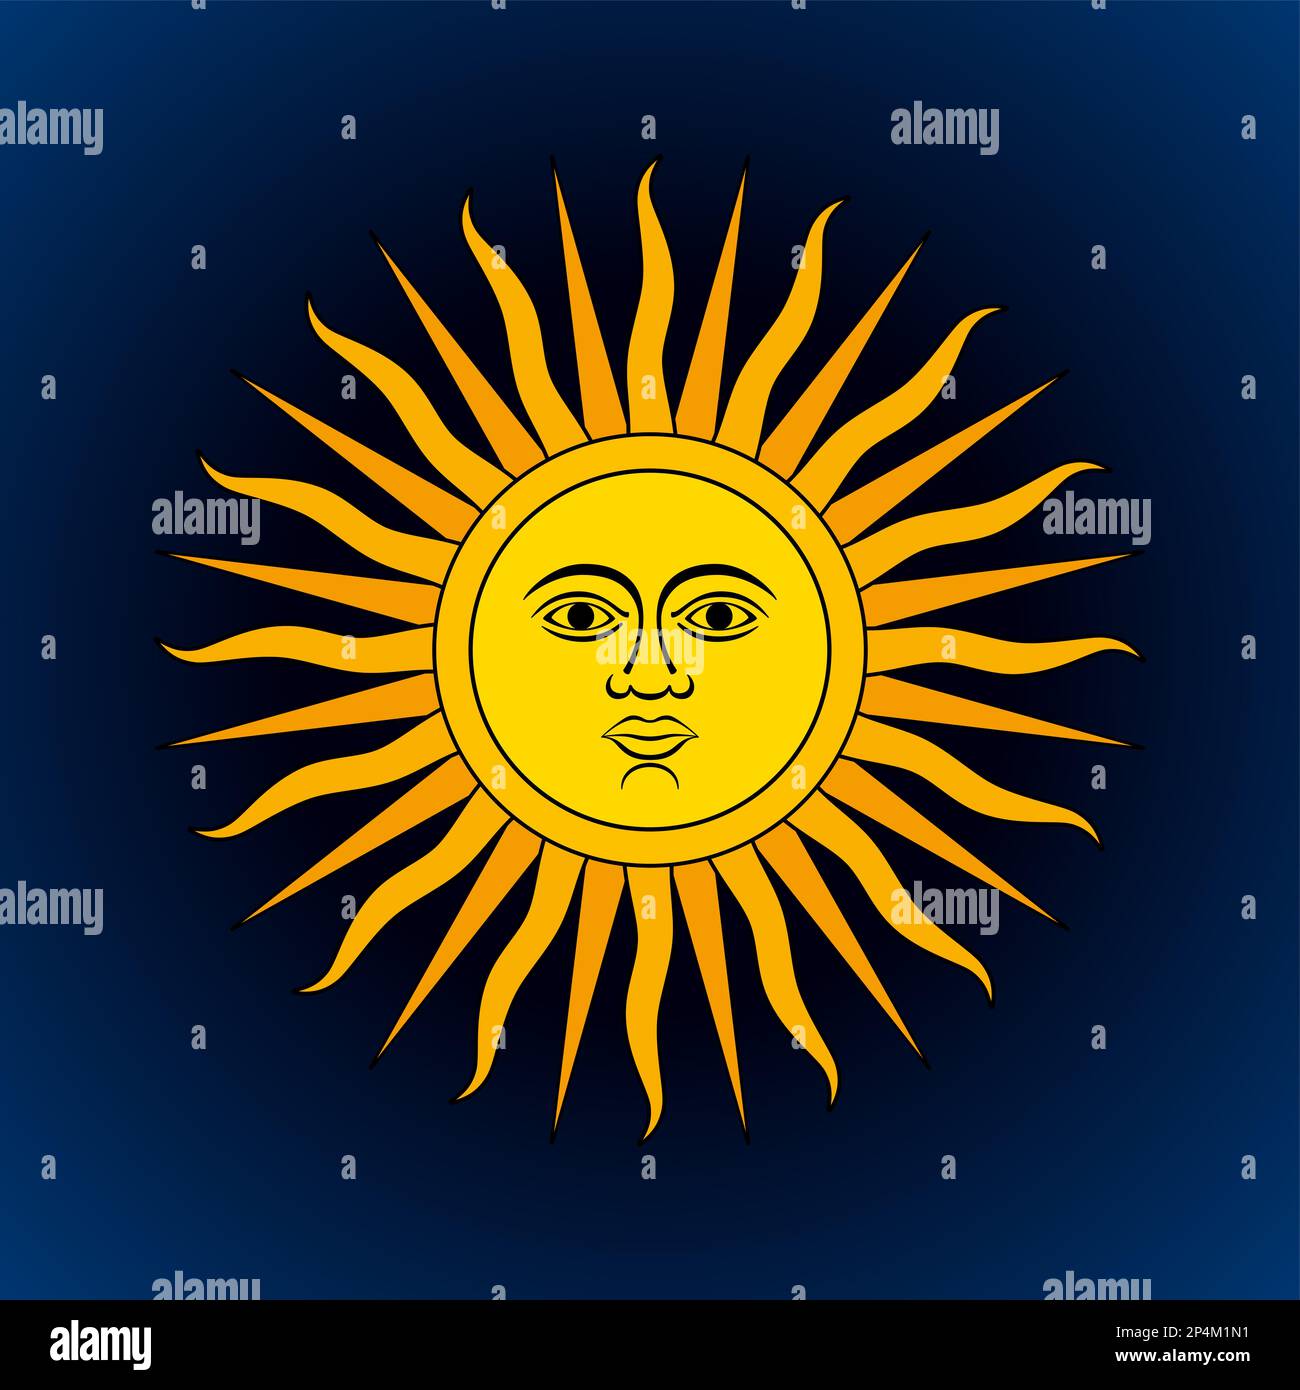 Sun symbol on dark blue background. Analogue to the Sun of May, a national emblem of Argentina and Uruguay. Radiant golden yellow solar disk. Stock Photo